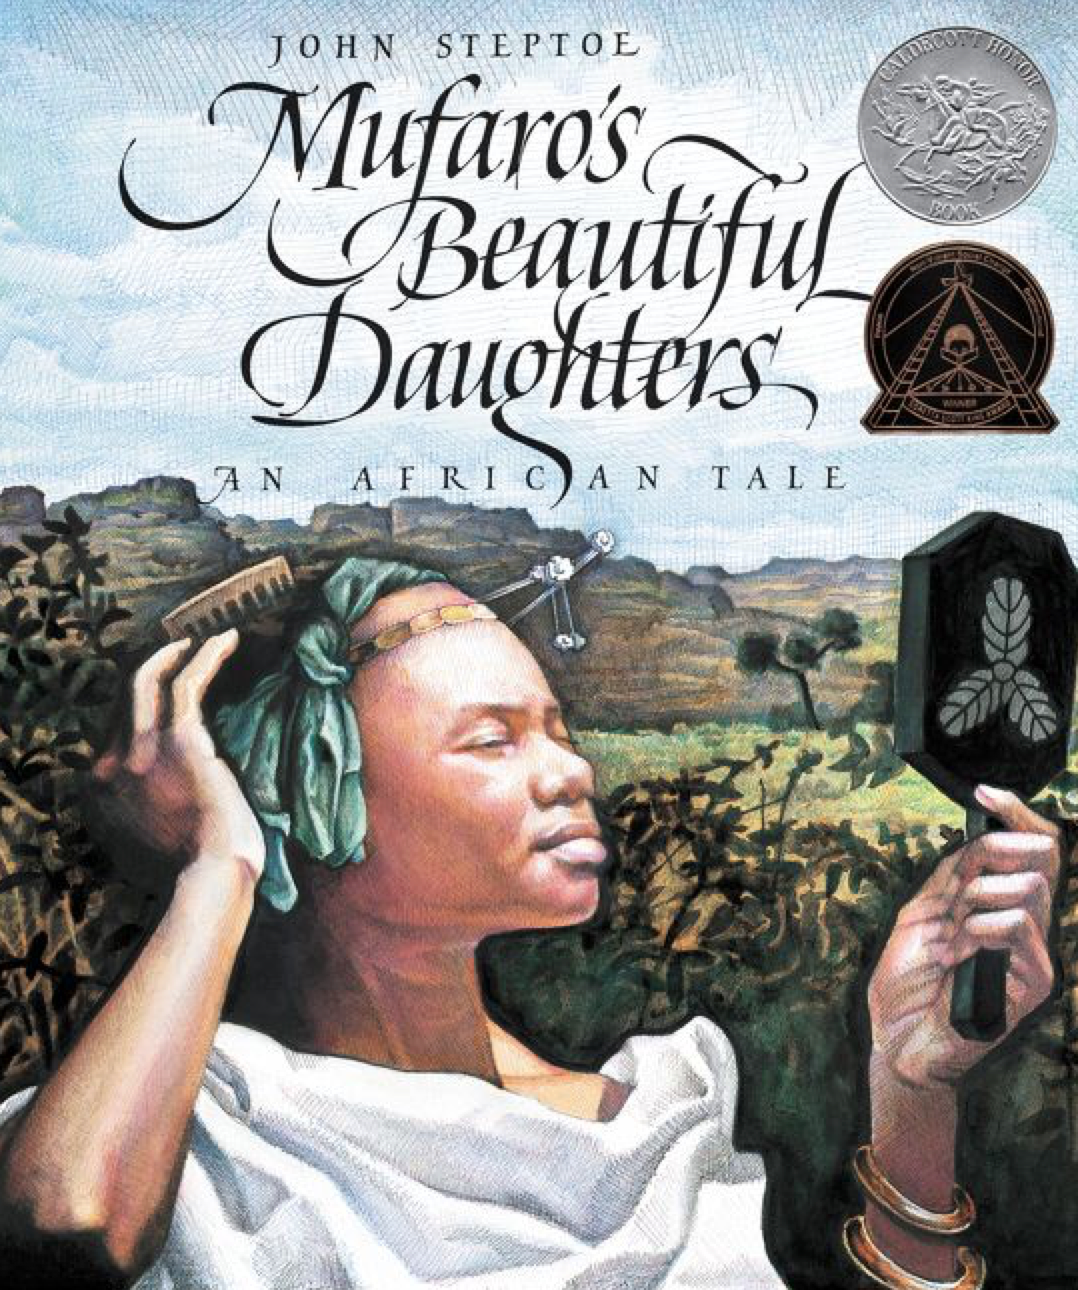 Illustrated book cover for Mufaro's Beautiful Daughters featuring a young African woman admiring herself in a handheld mirror. She is wearing a loose white garment, a green head scarf, and jewelry. Behind her is grassy savanna and mountains.